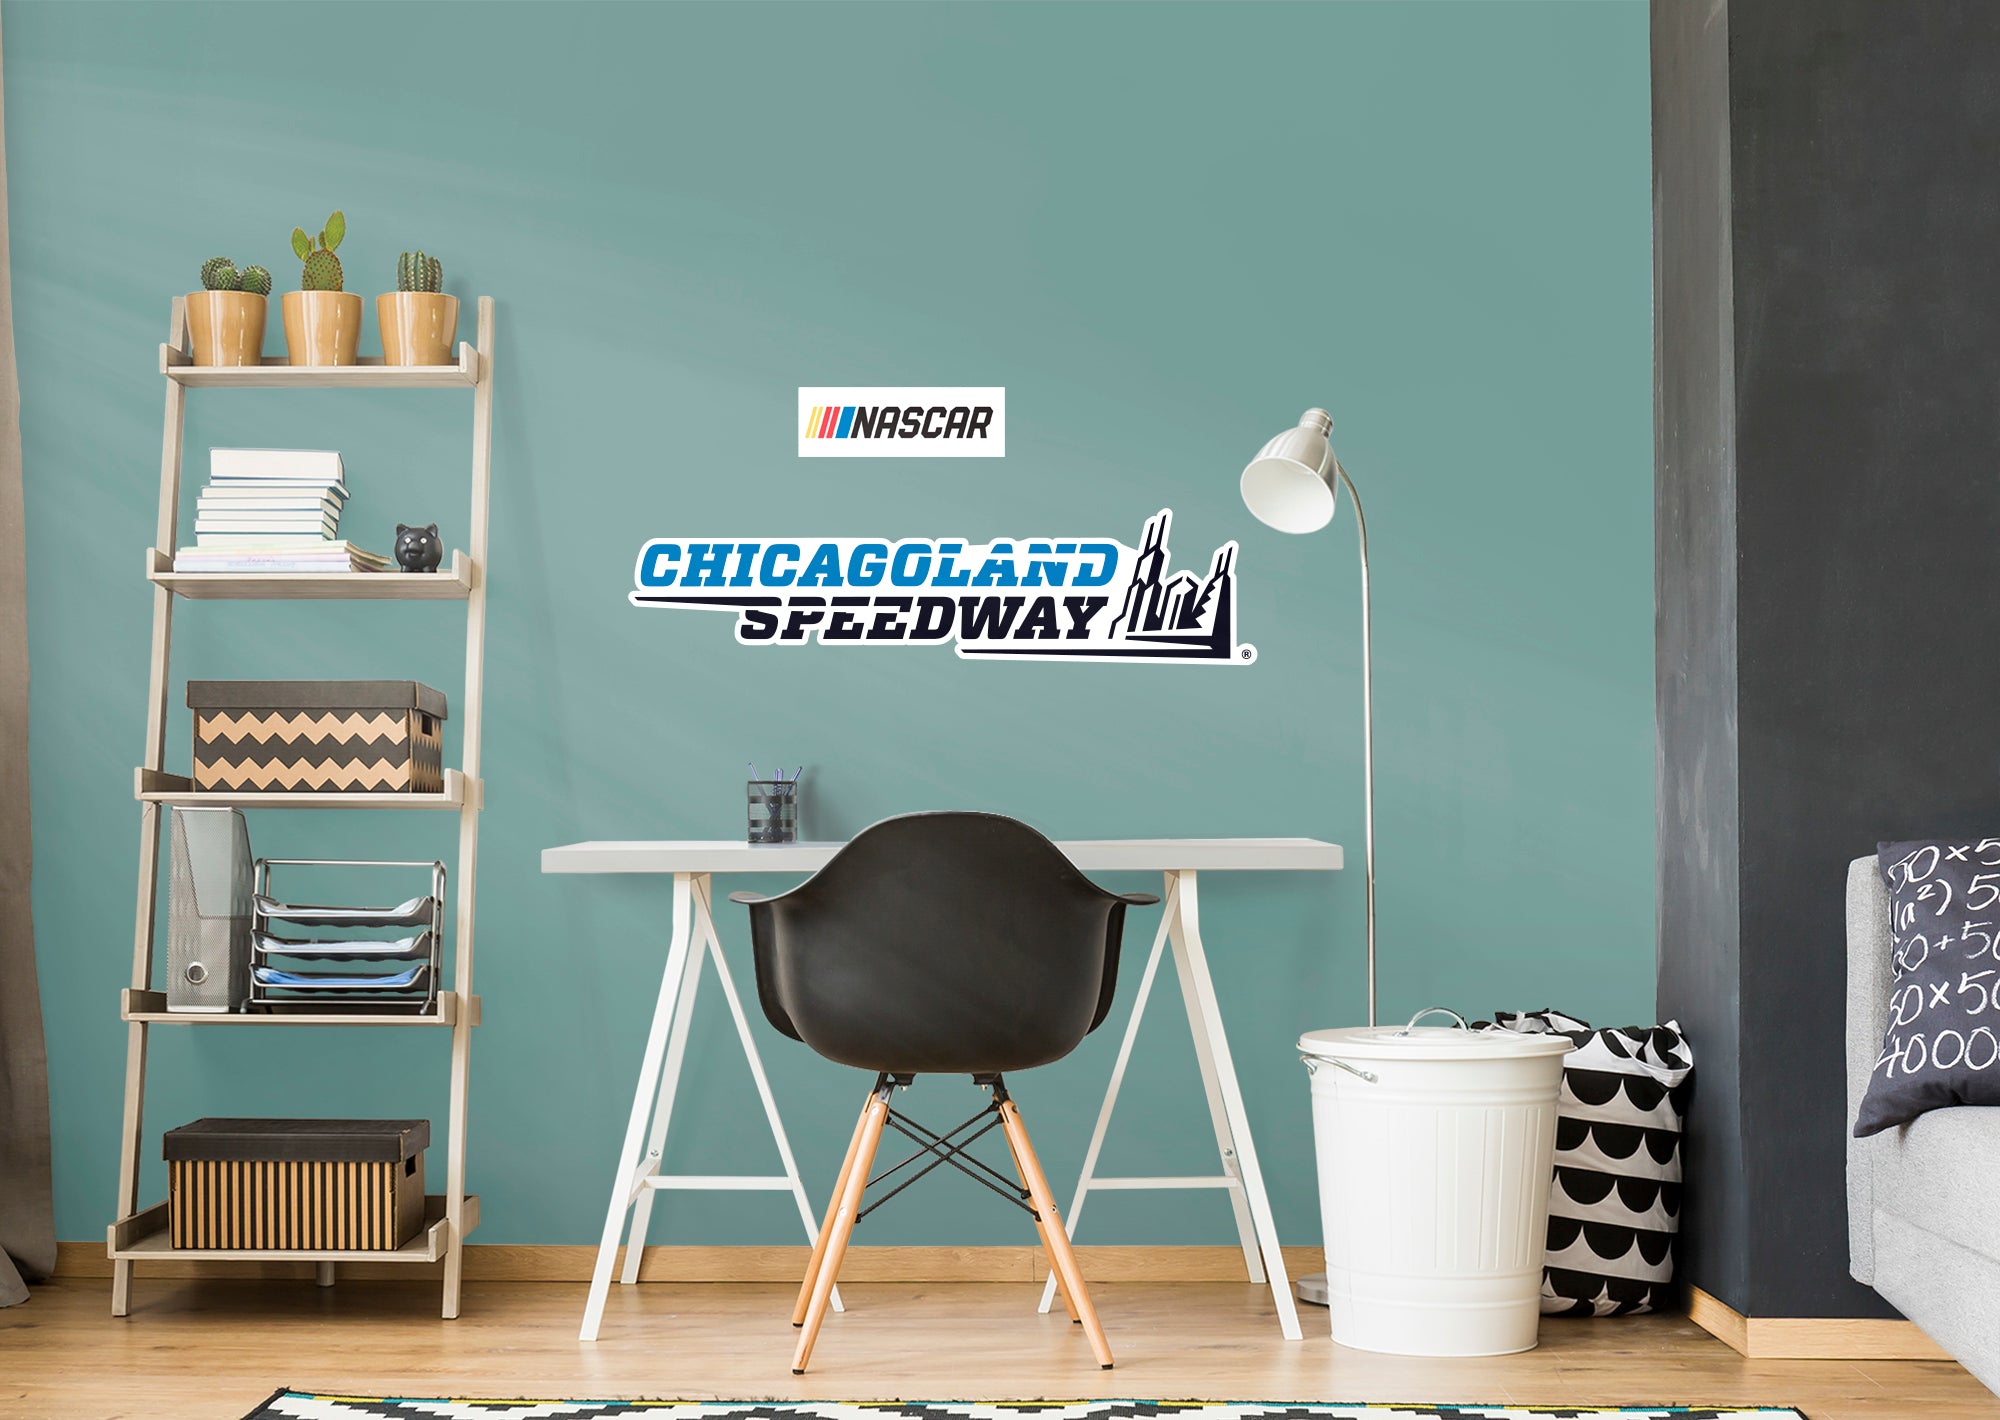 Chicagoland Speedway 2021 Logo - Officially Licensed NASCAR Removable Wall Decal XL by Fathead | Vinyl